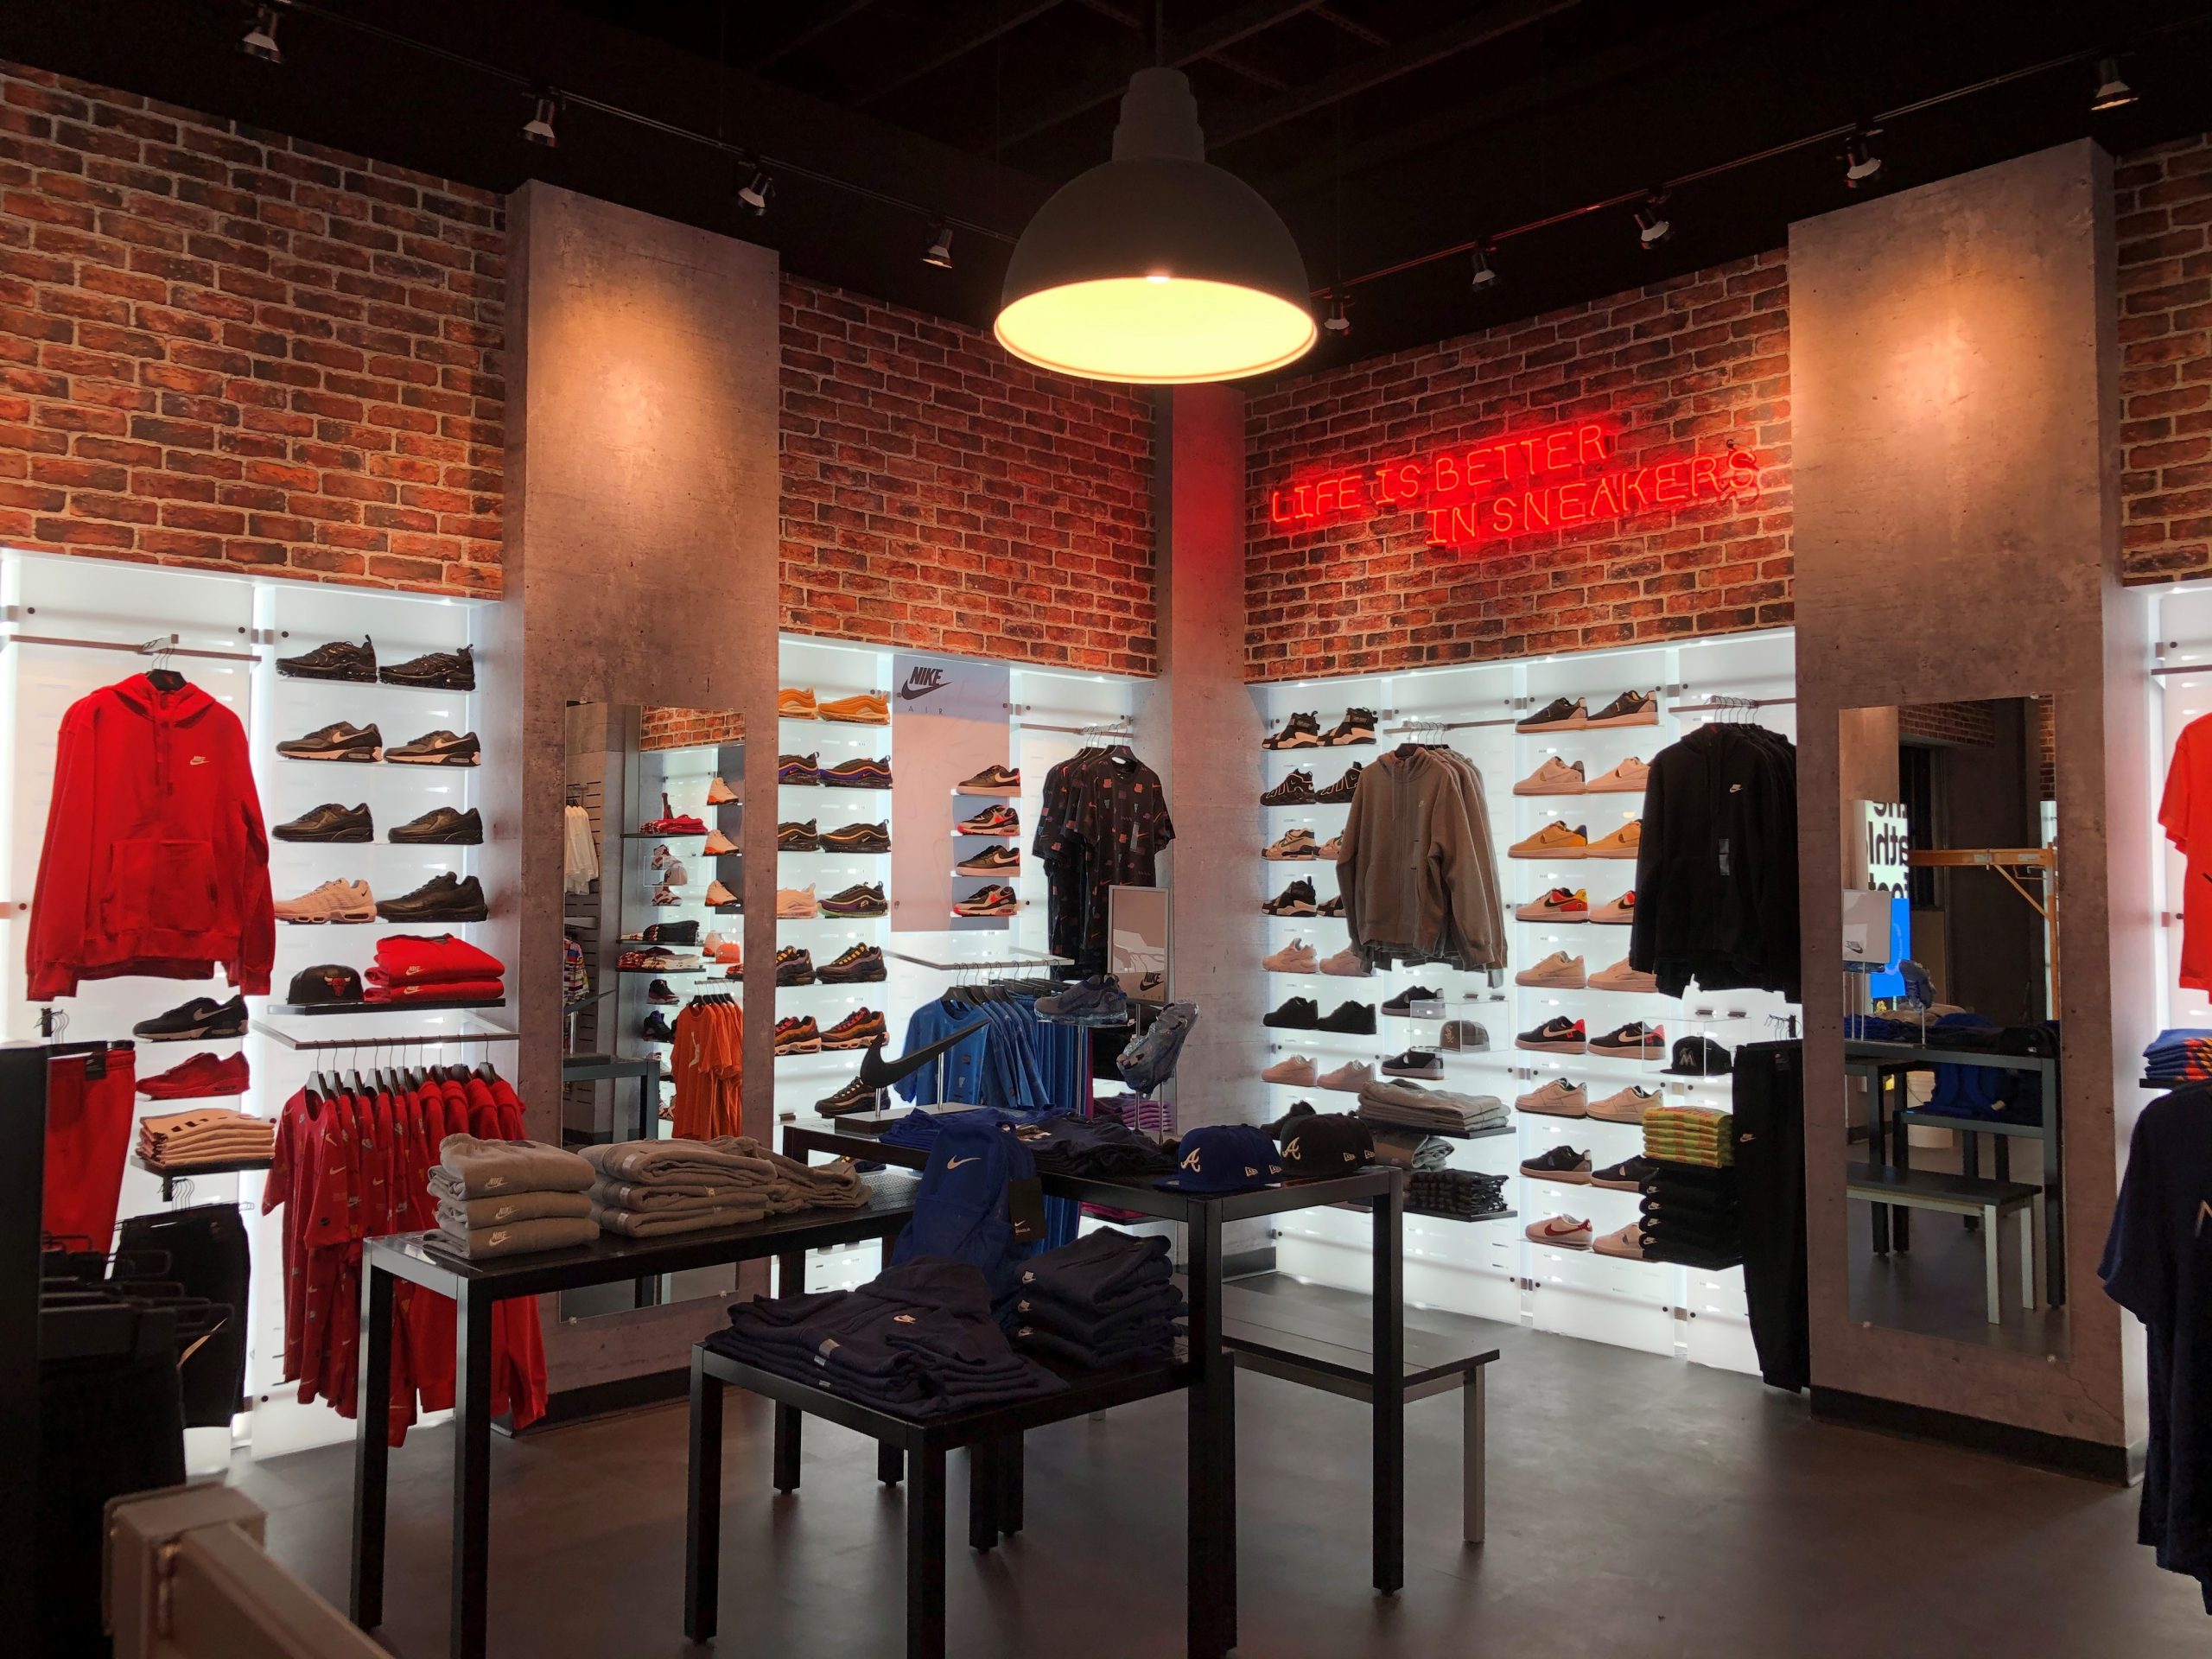 Will Foot Locker be better off long-term with fewer Nike shoes on